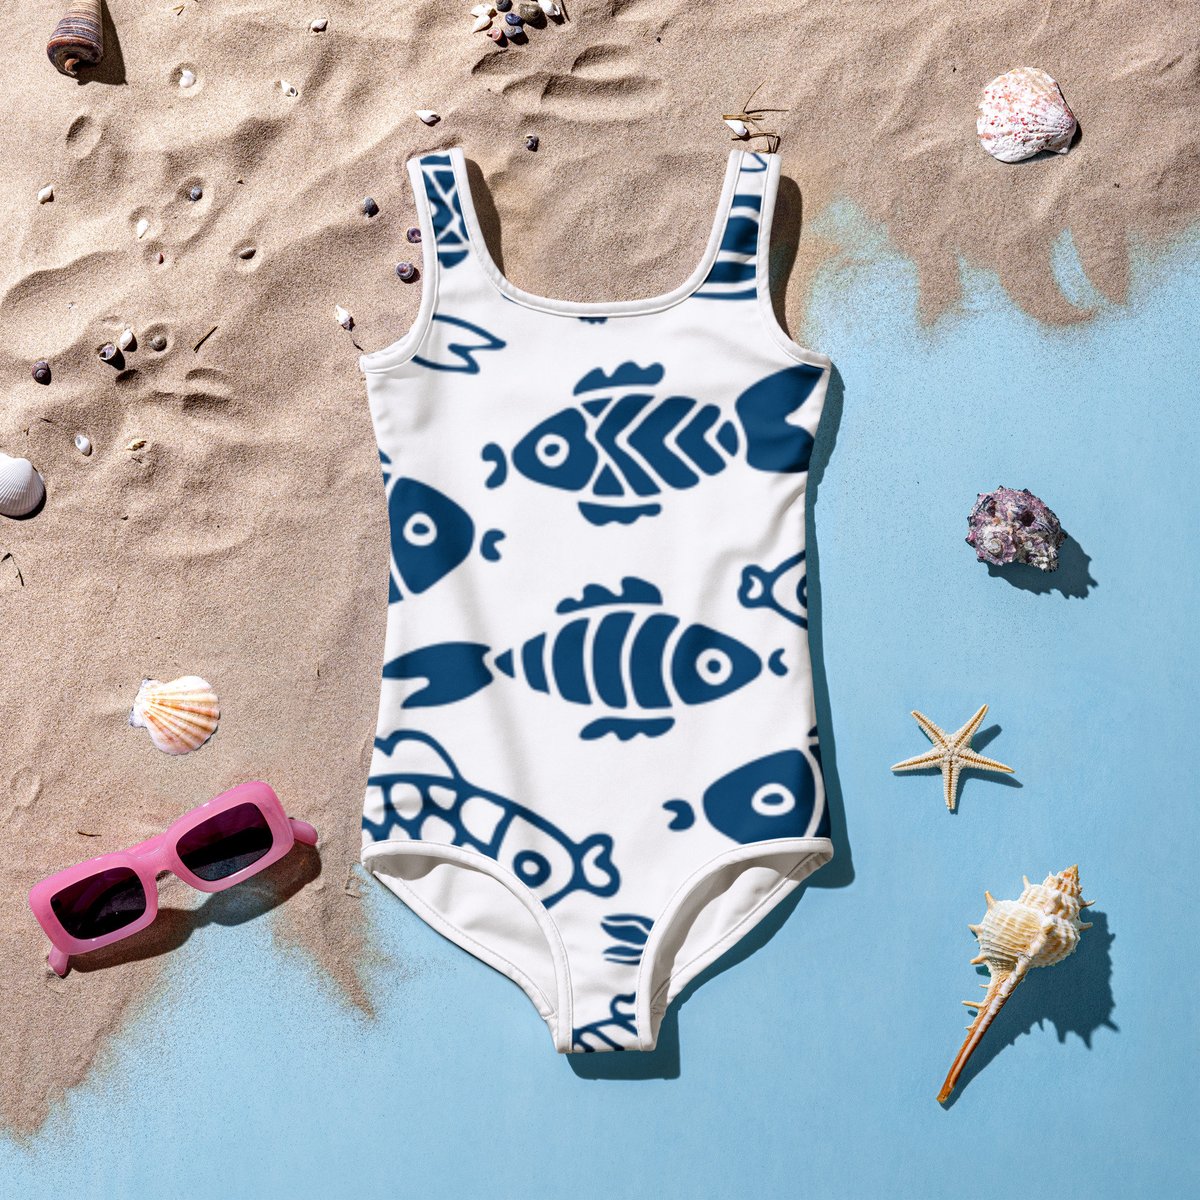 Blue Fish All-Over Print Kids Swimsuit, children swimsuit, kids bathing suits, vacation, summer, gift ideas, kids clothing tuppu.net/d13bb039 #EtsyShop #MothersDay #FourthofJuly #GiftsforMom #MemorialDay #Etsy #HandmadeGifts #GirlsSwimsuits